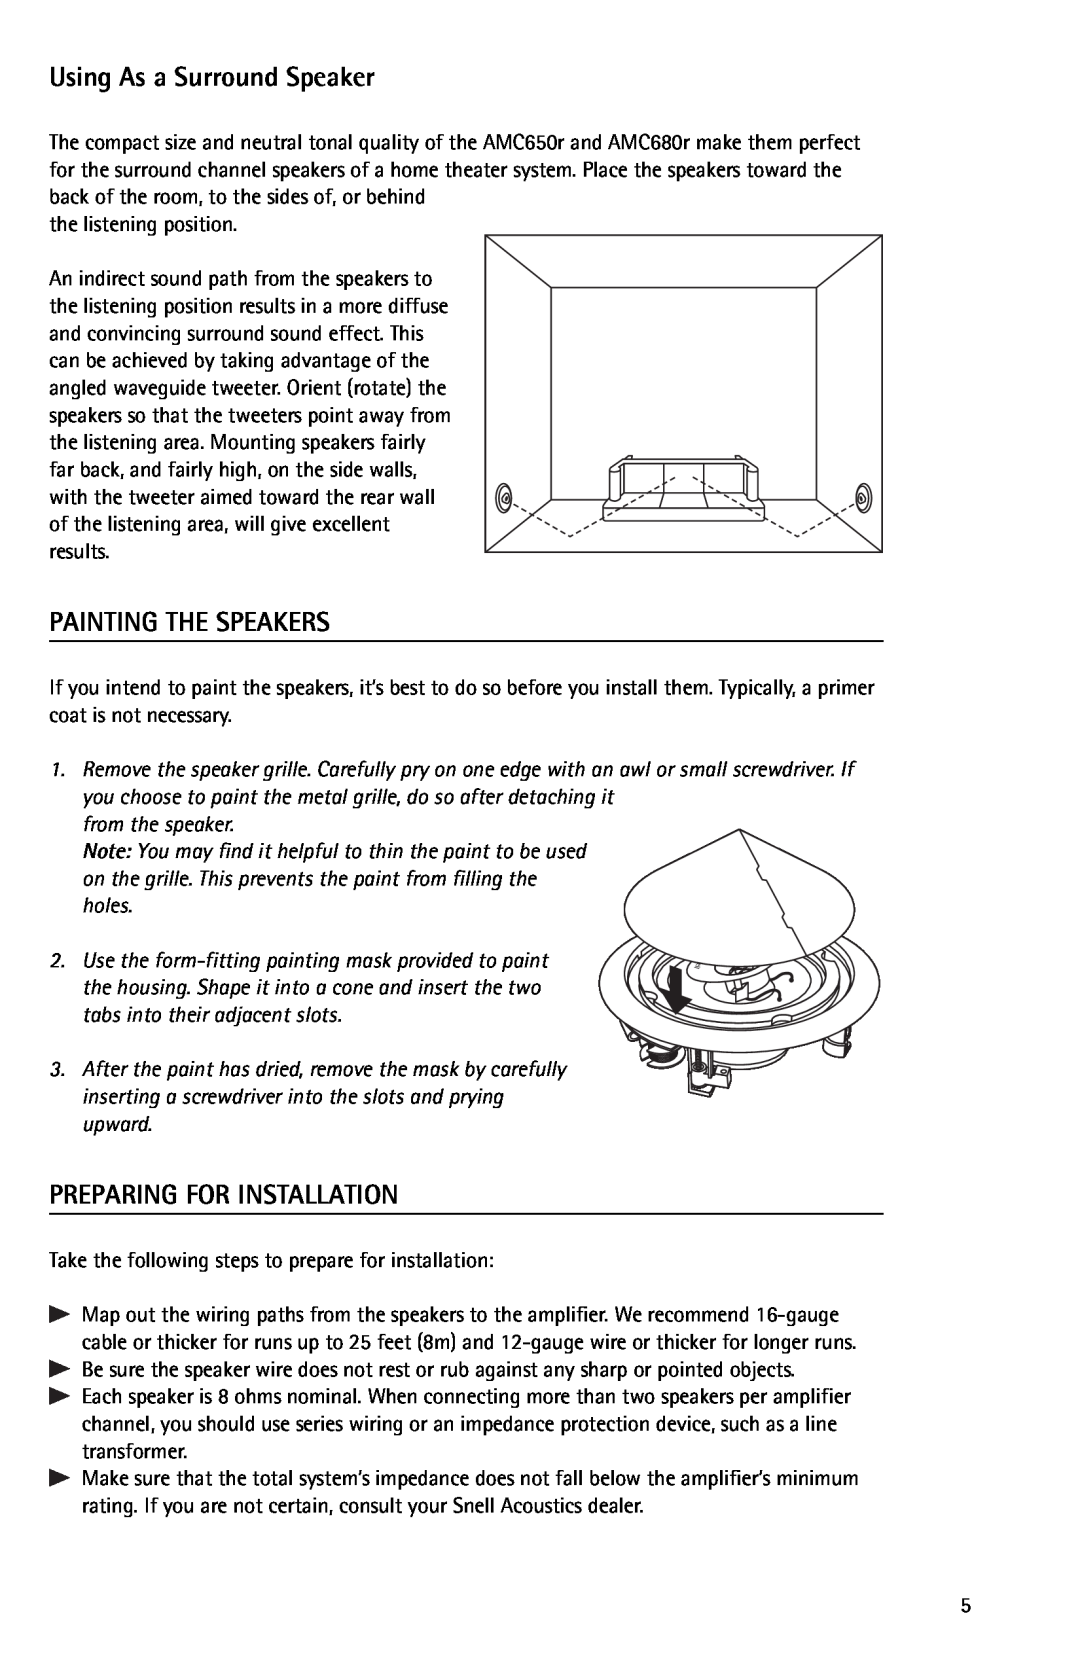 Snell Acoustics 680r, 650r owner manual Using As a Surround Speaker, Painting The Speakers, Preparing For Installation 